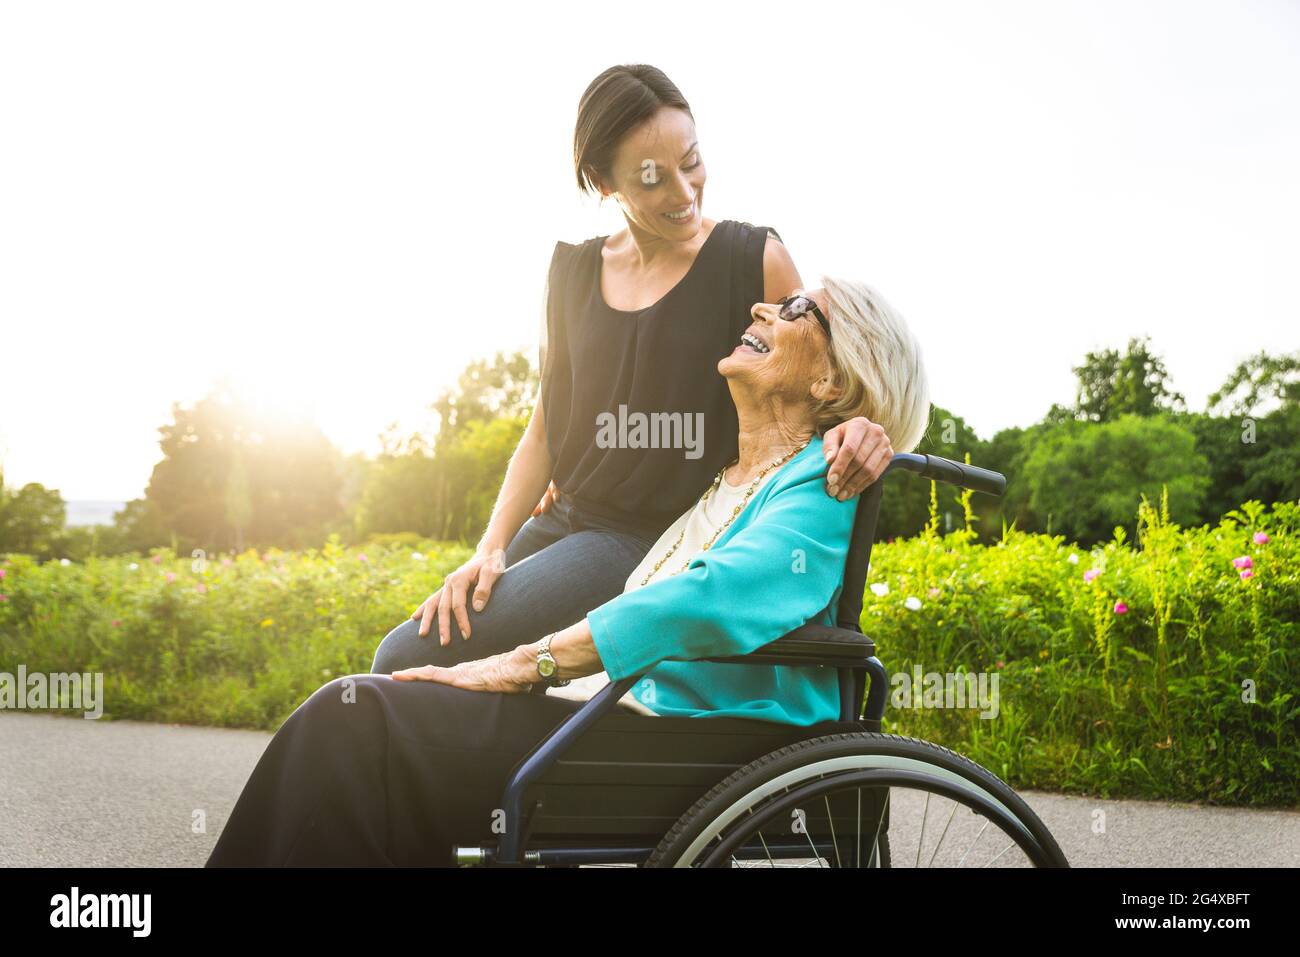 Granddaughter smiling while looking at grandmother sitting in wheelchair Stock Photo